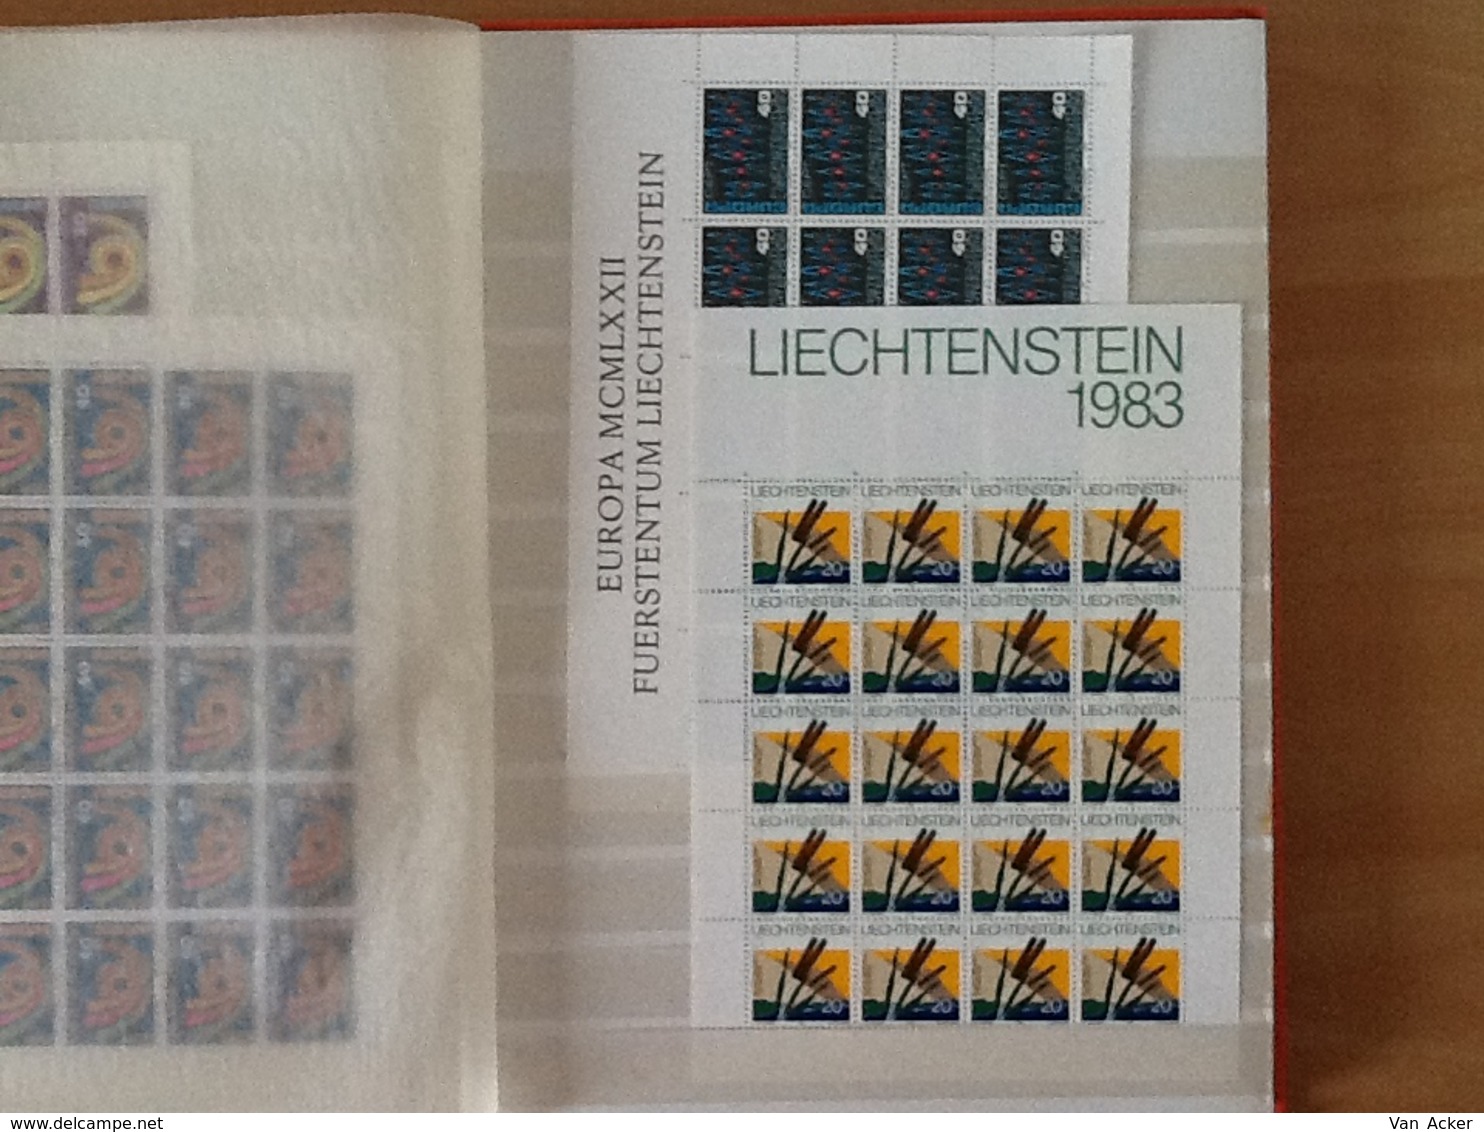 Collection Europe MNH ( with blocks and sheets)